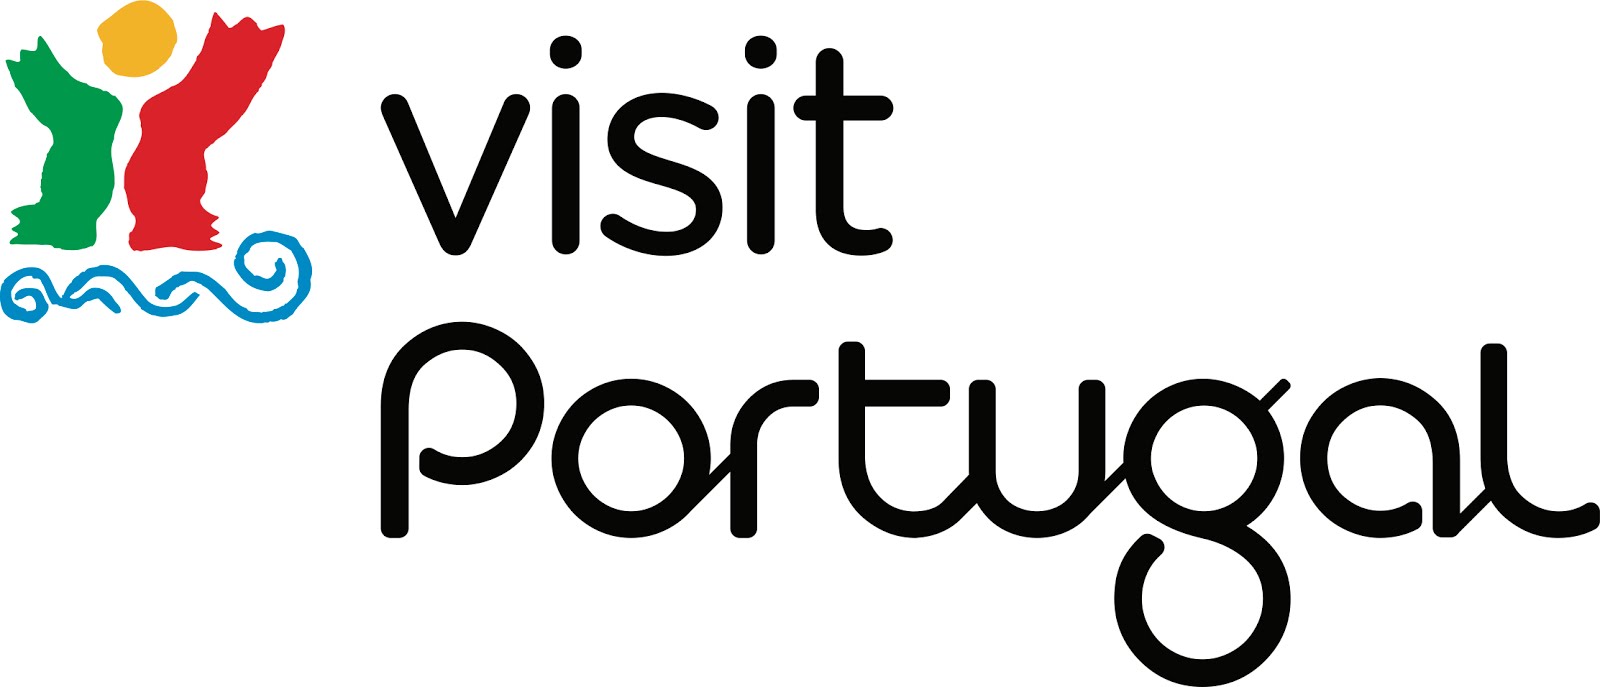 More information about Portugal